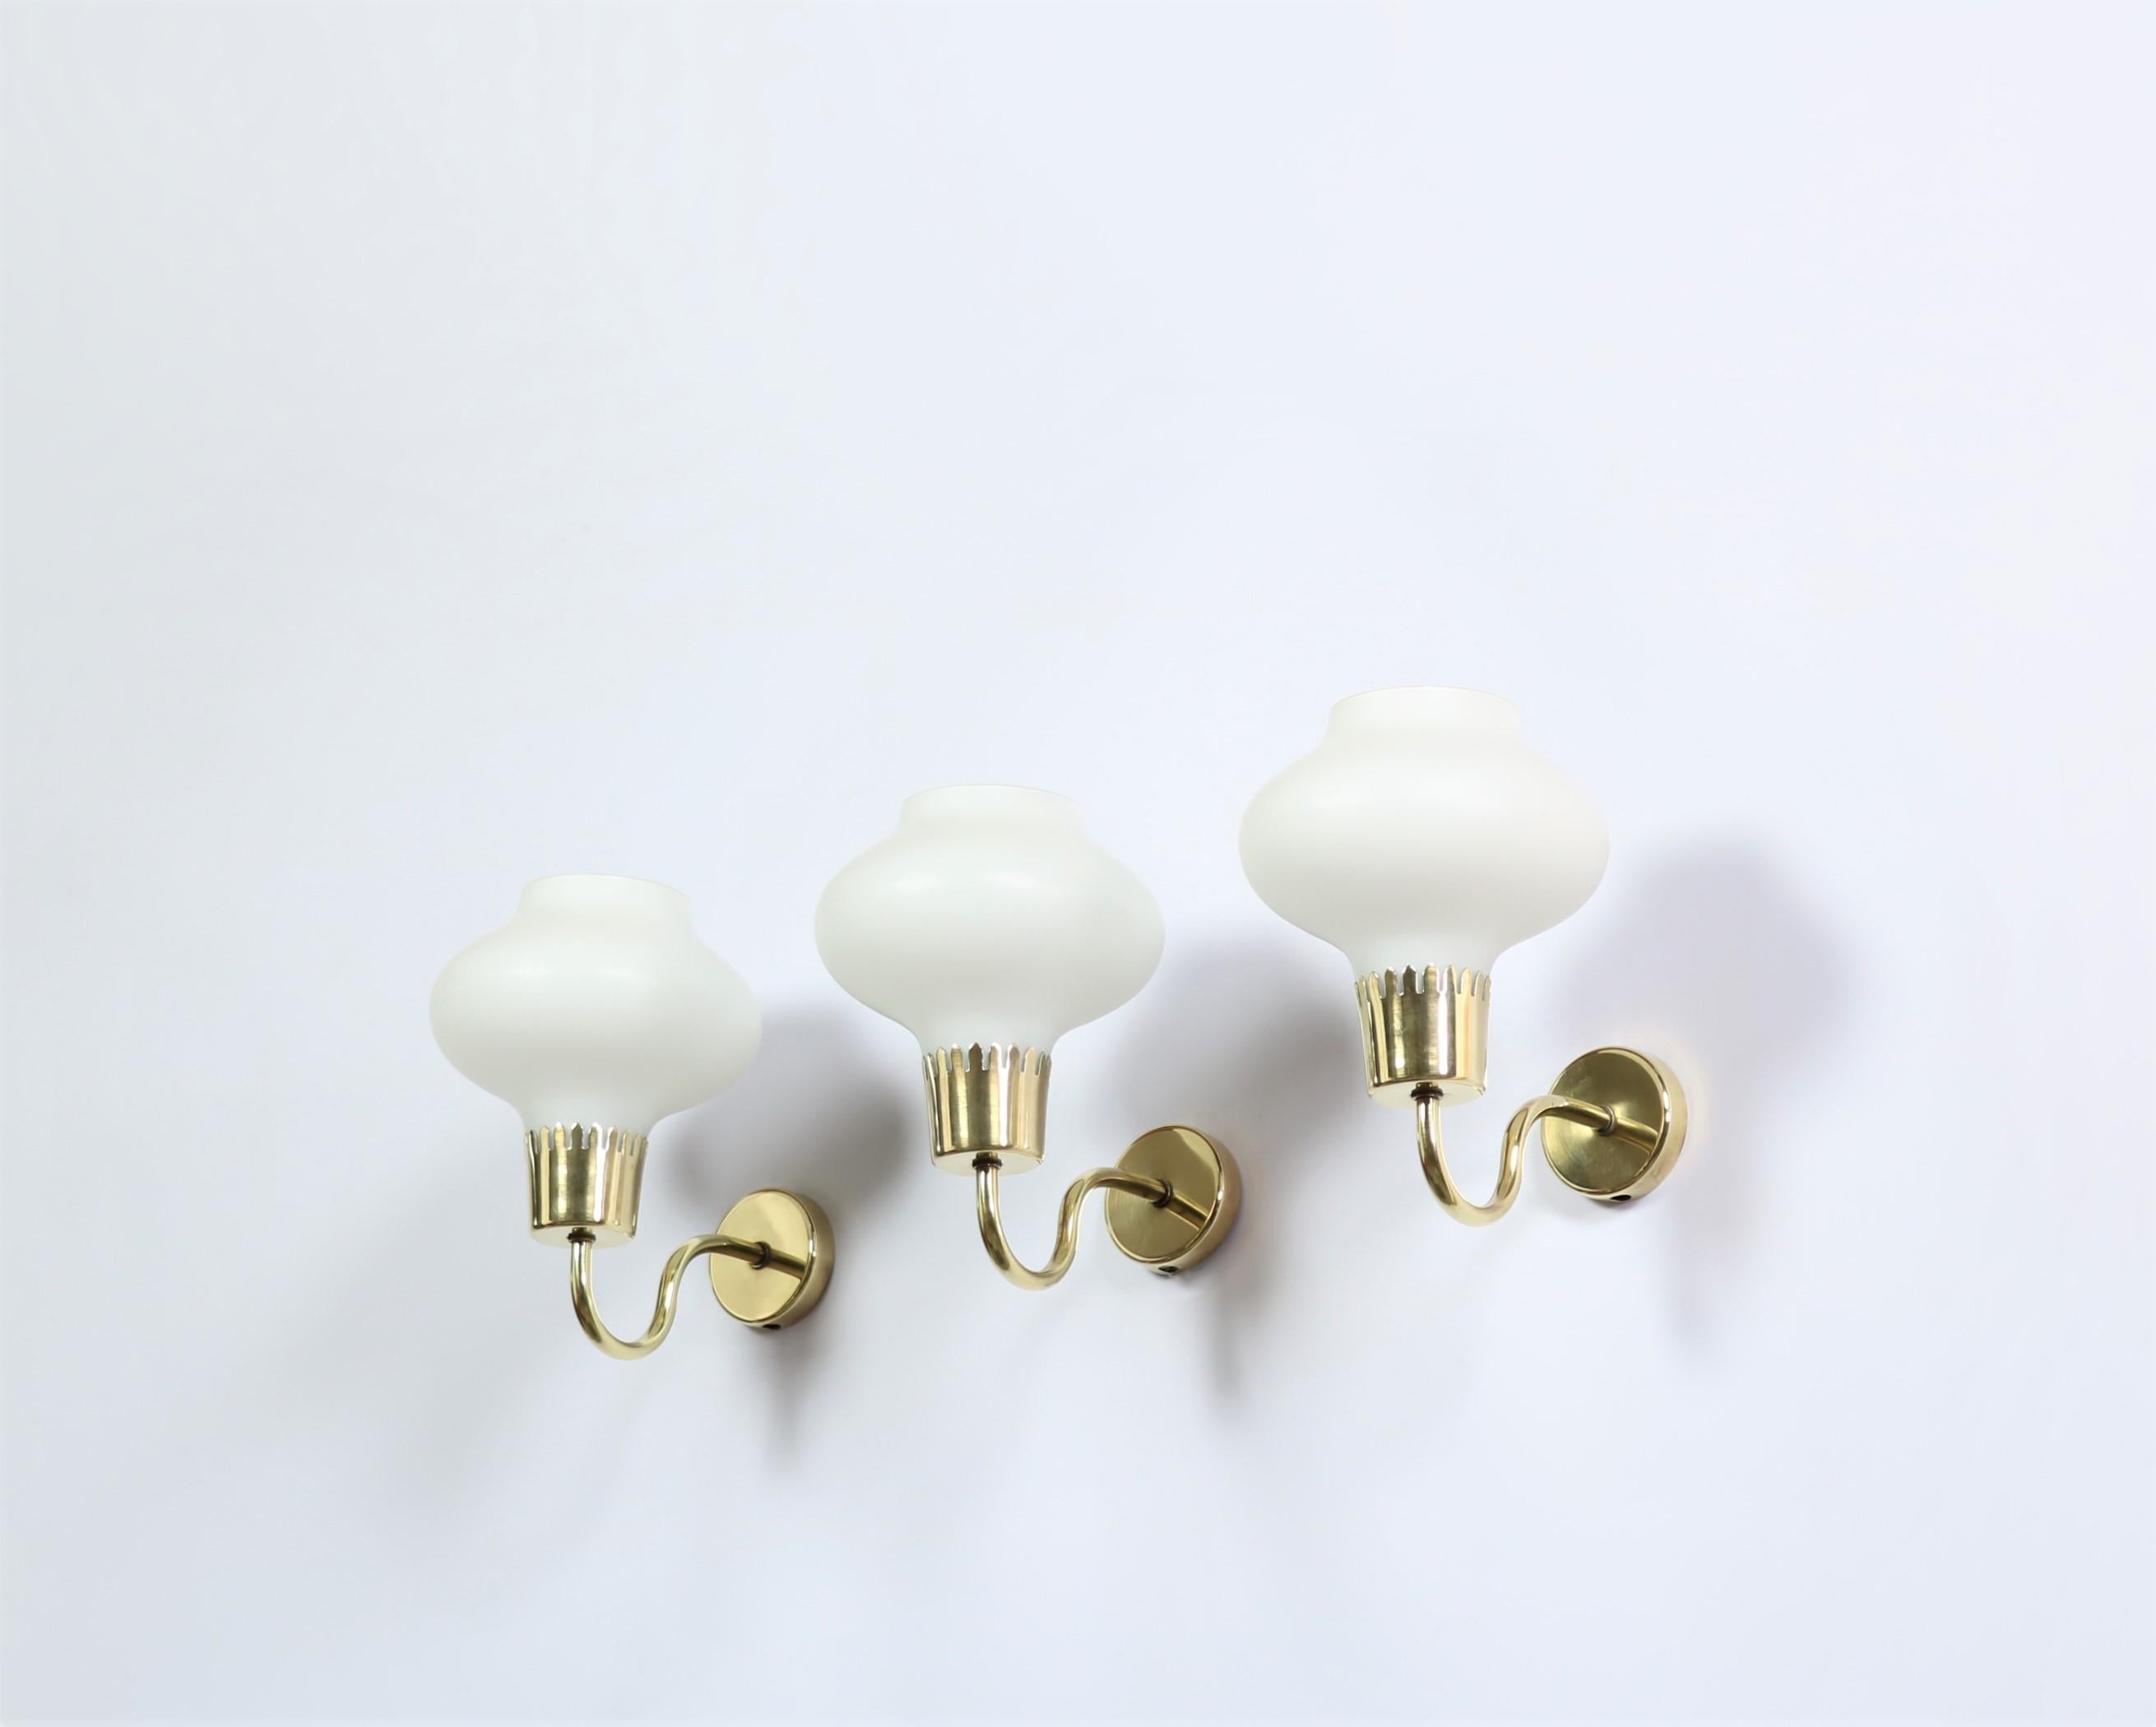 Set of Danish Modern Brass and Opal Glass Wall Sconces by Acton Bjorn, 1950s For Sale 1